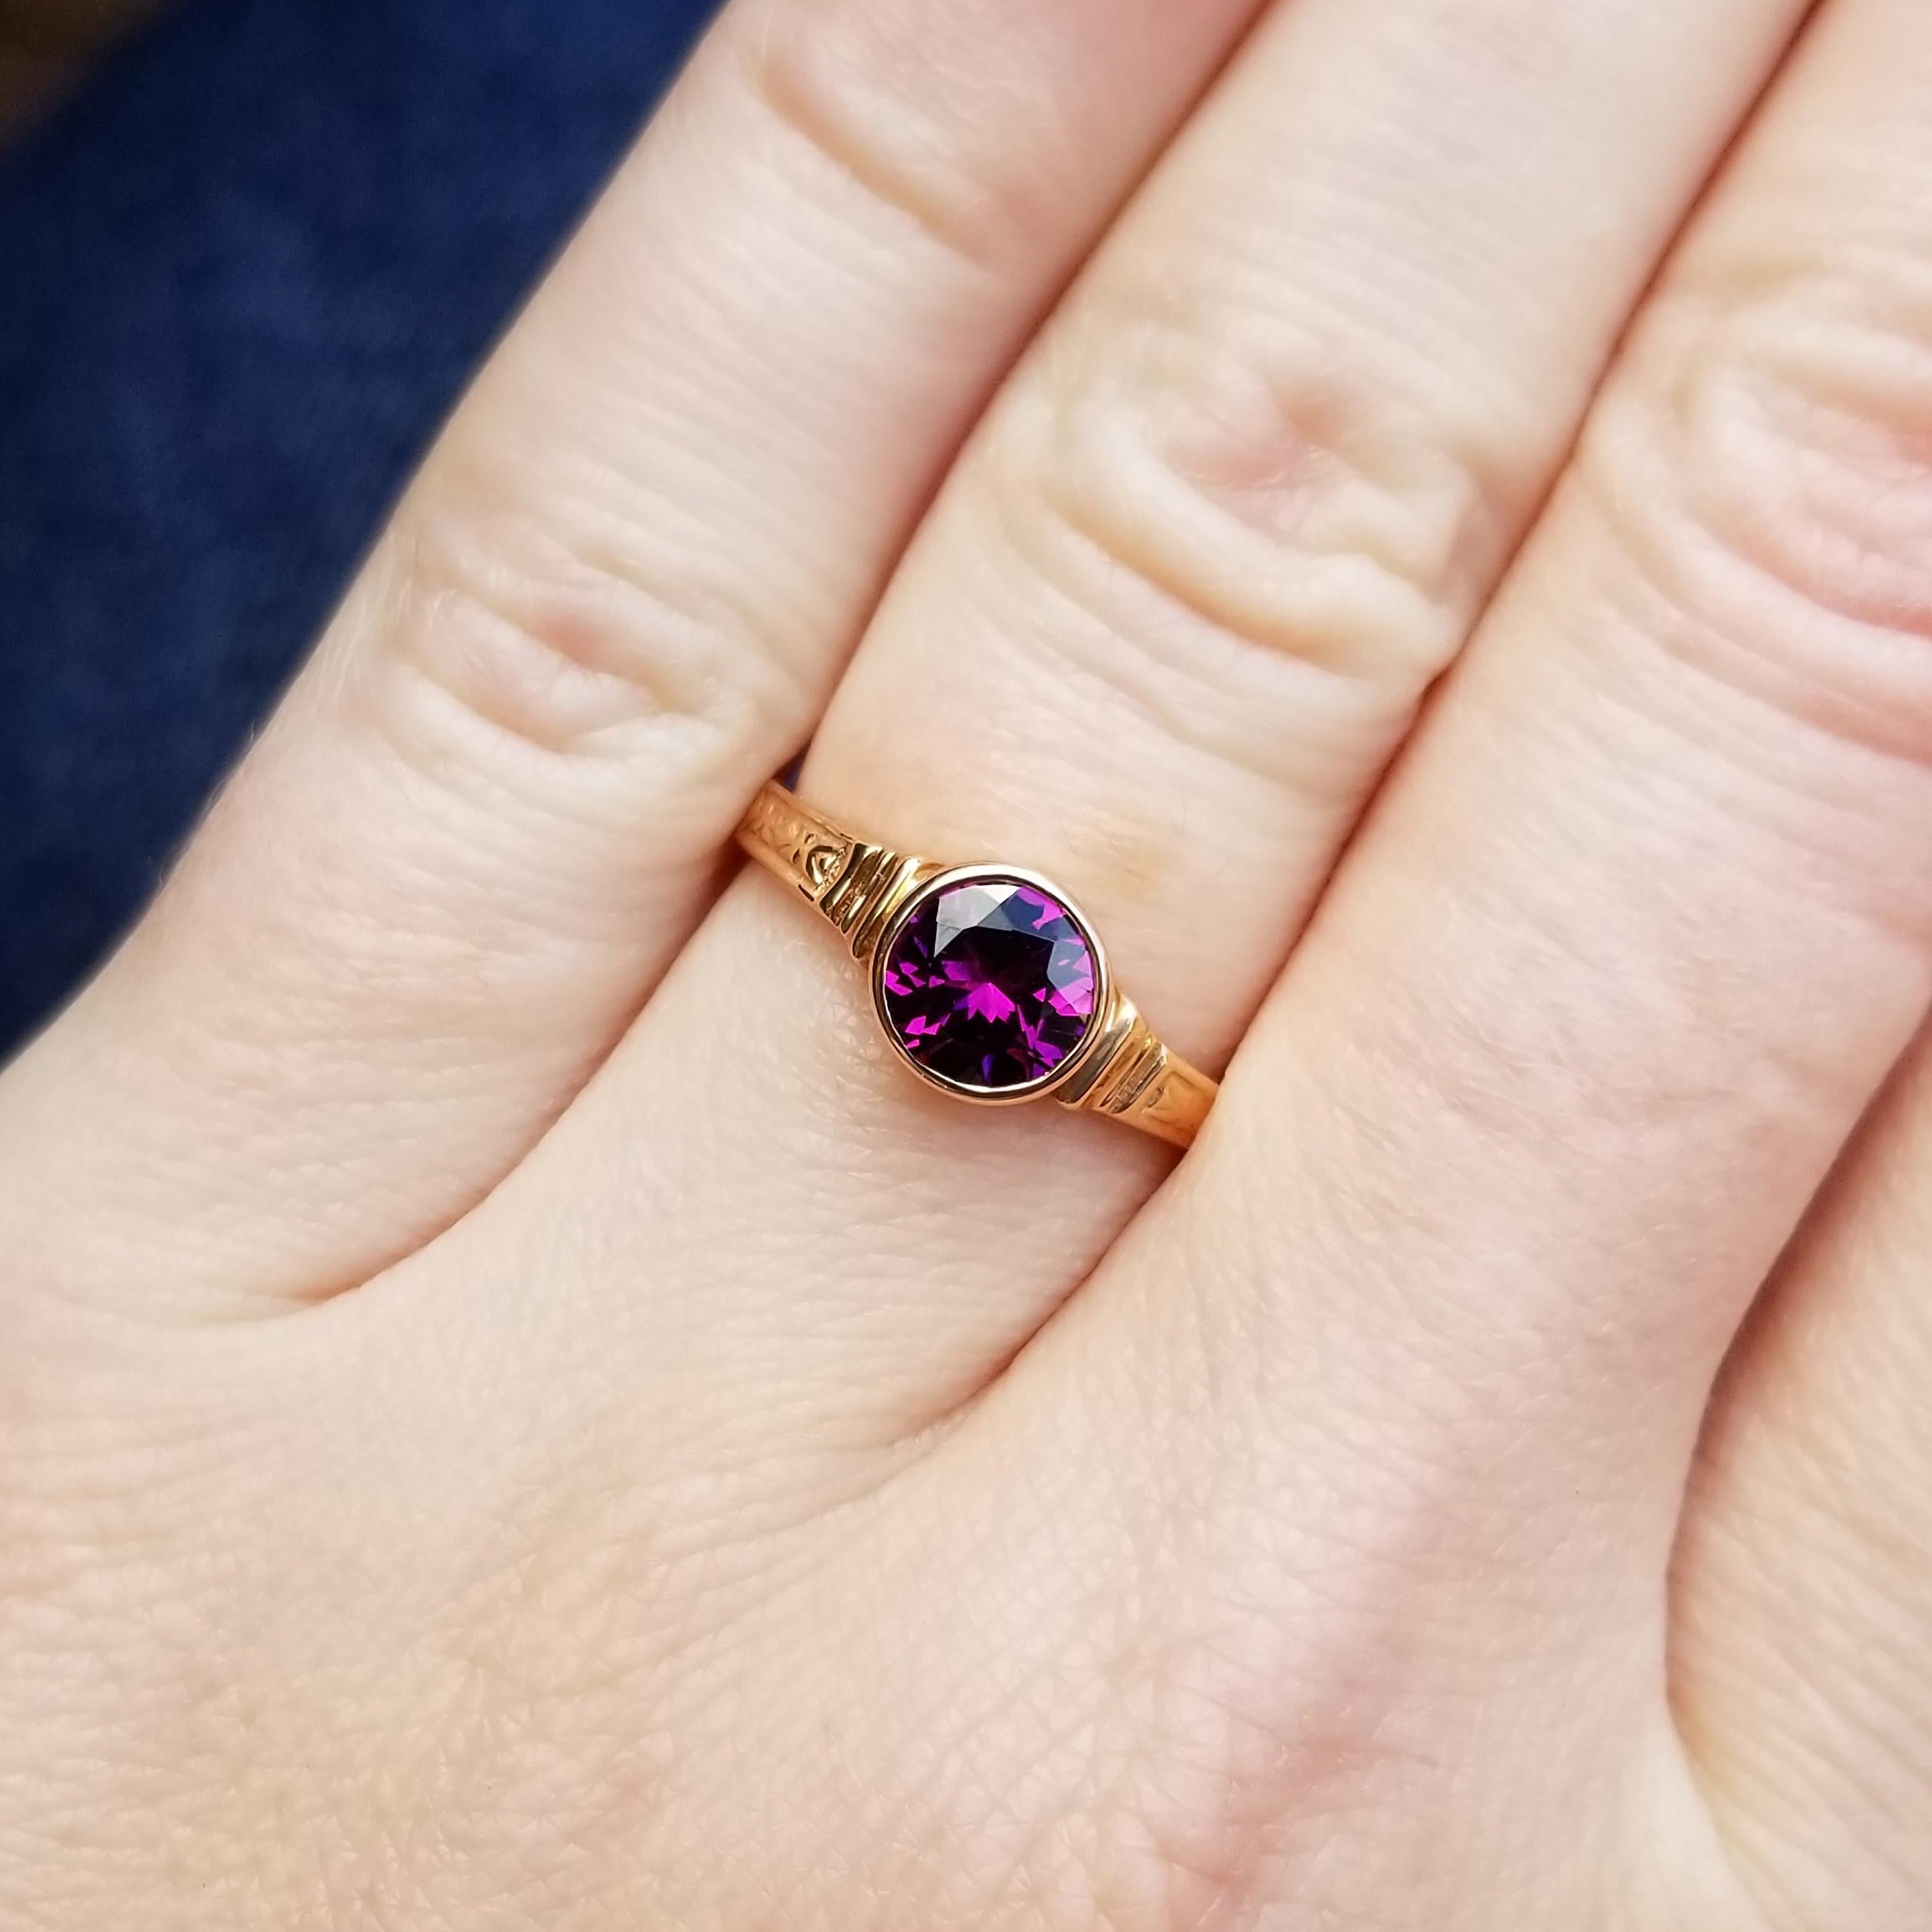 Purple grape garnet is a rare and truly beautiful gemstone. The intense purple flashes and sparkles gorgeously in this well cut gemstone, and because it is a garnet the color is completely natural. This garnet shows a great color shift in different